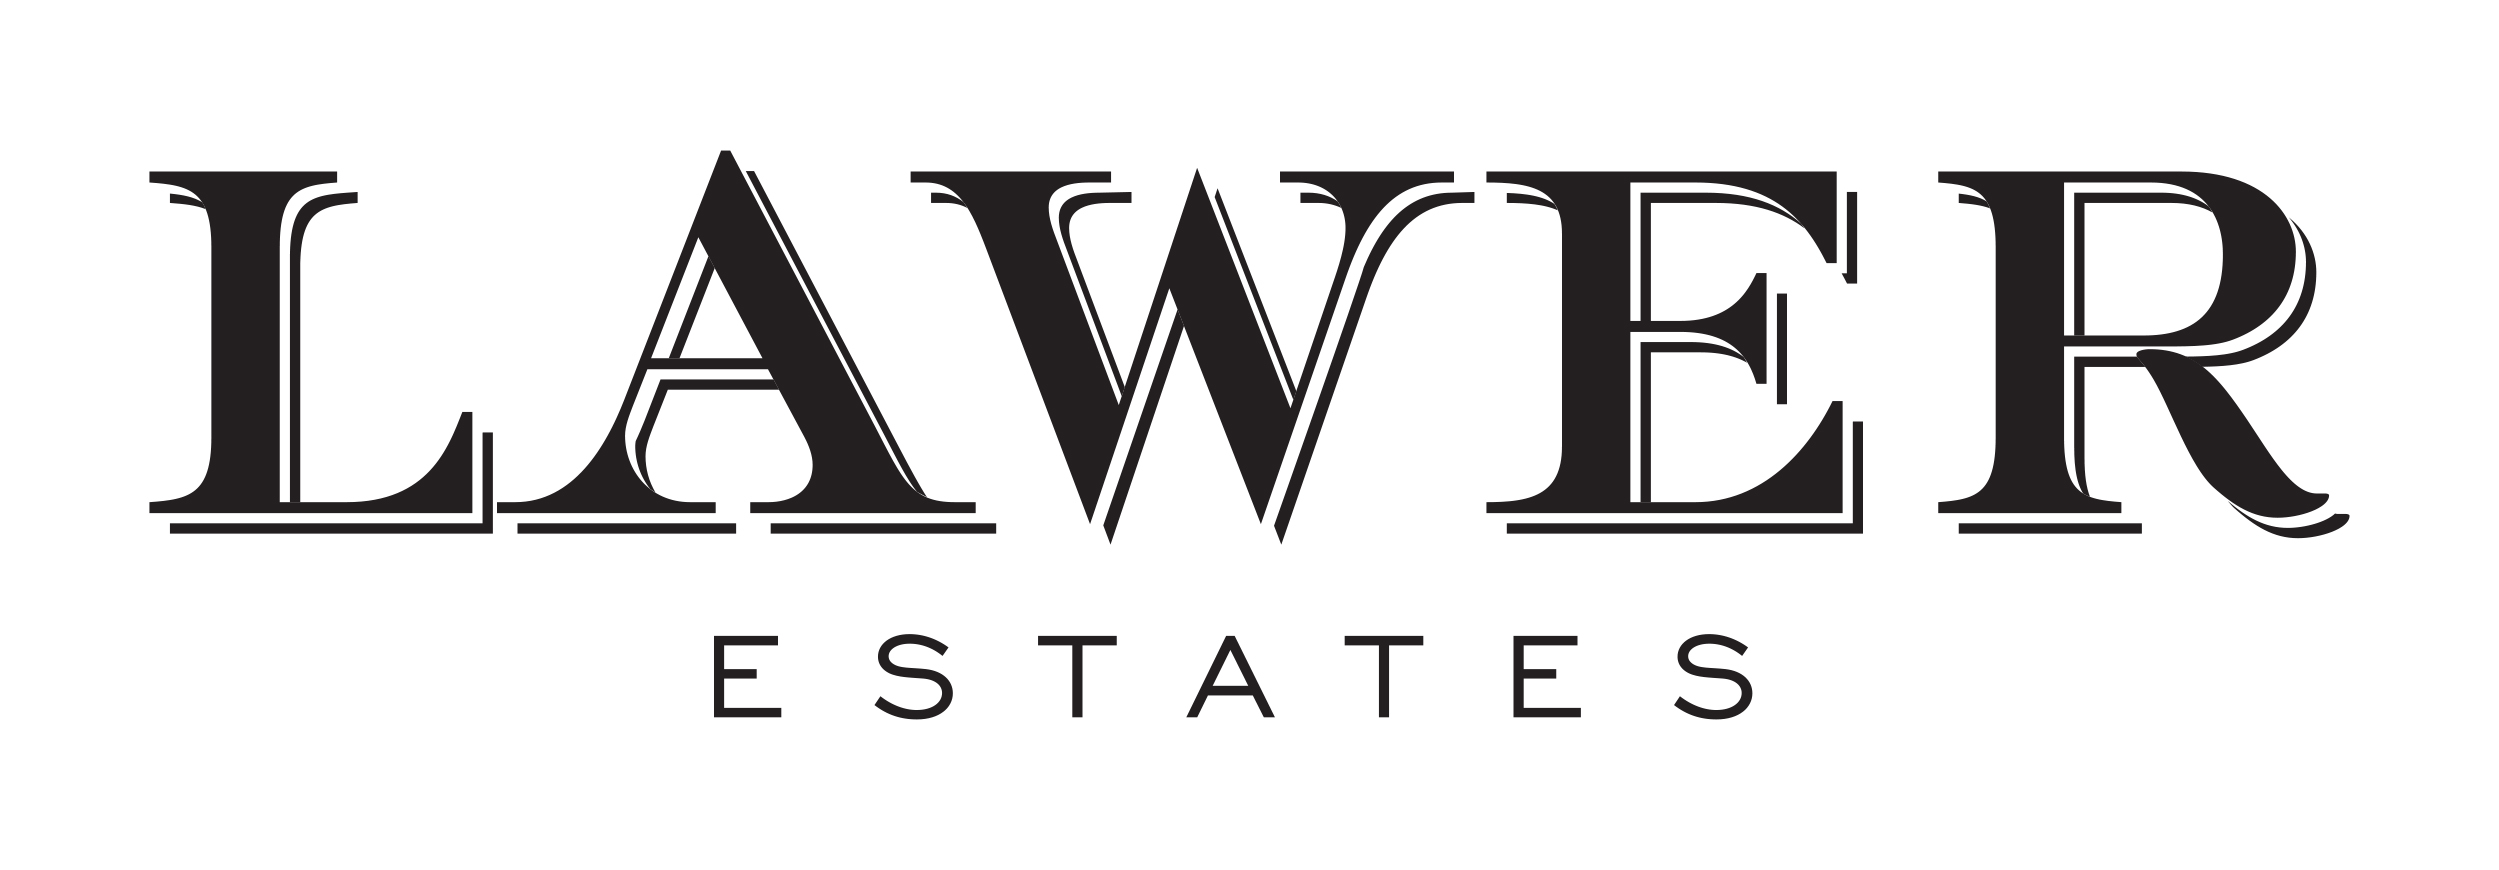 Lawer Estates is a family owned, sustainably farmed limited production winery based in Calistoga, California